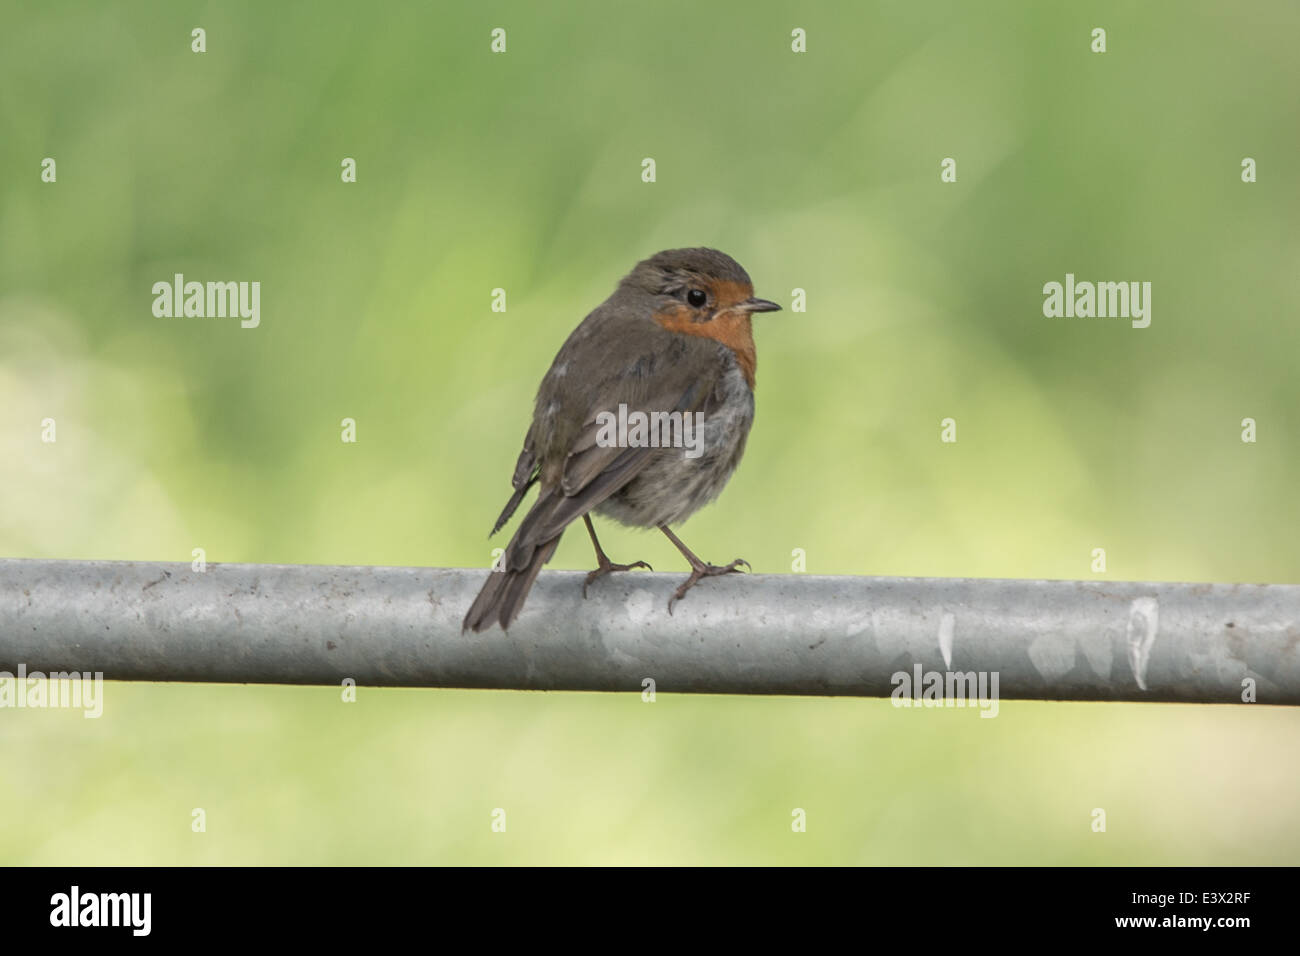 Robin perched on gate Stock Photo